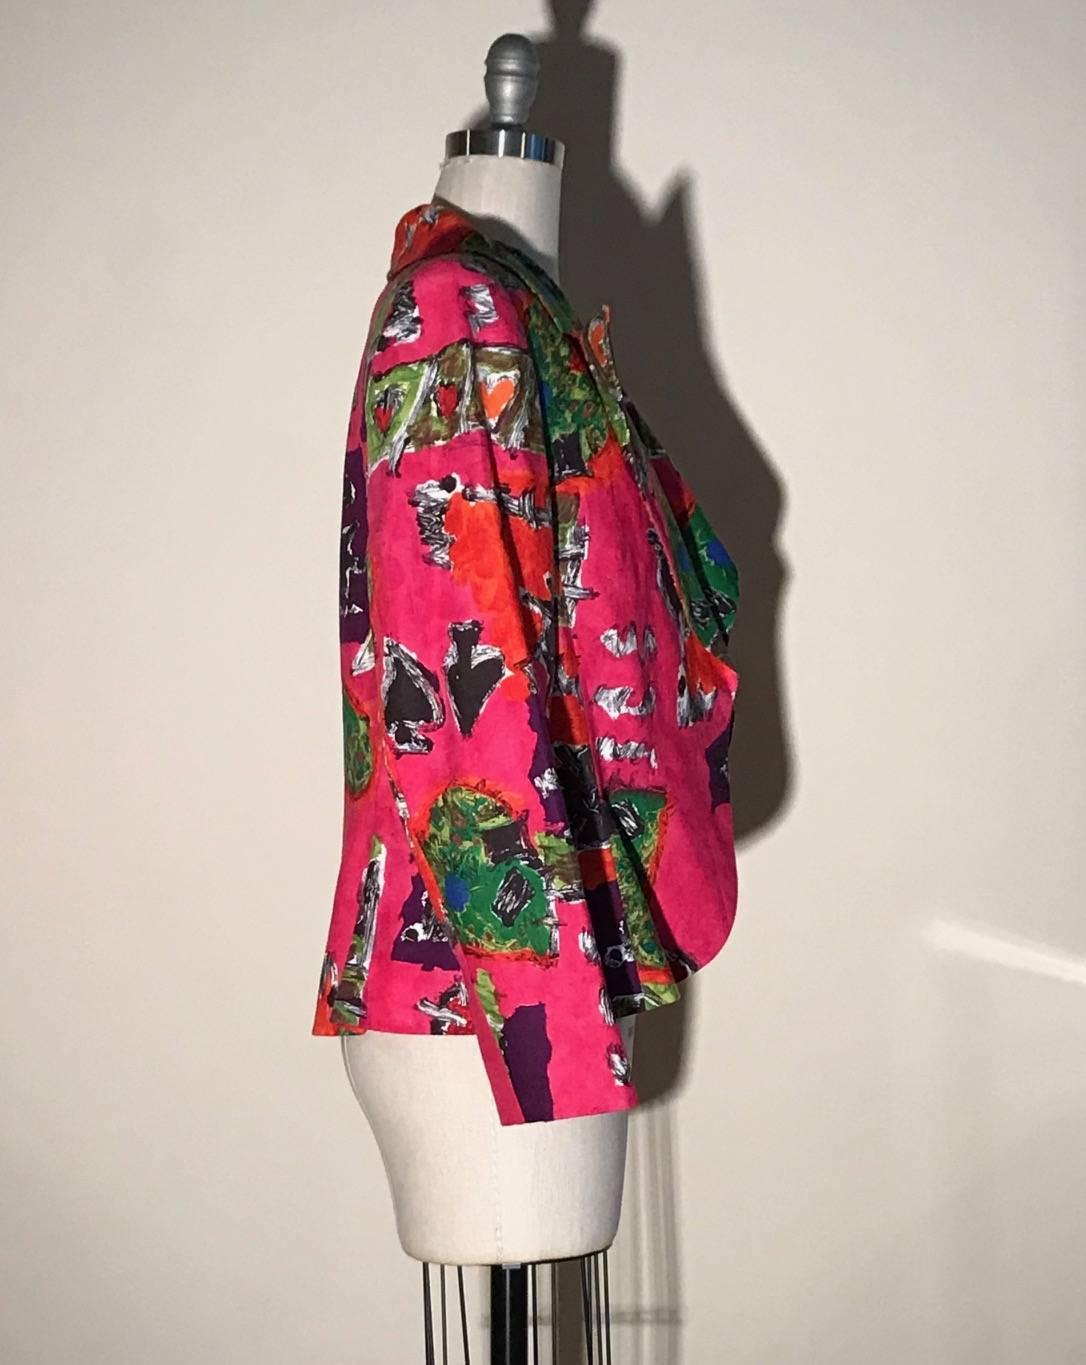 Christian Lacroix 1990s (estimated) pink and red abstract print open front jacket. Painterly brush strokes create abstract hearts, spades, clubs, squiggles, and landscapes on this wild wide lapeled linen jacket from Lacroix. 

100% linen.
Fully